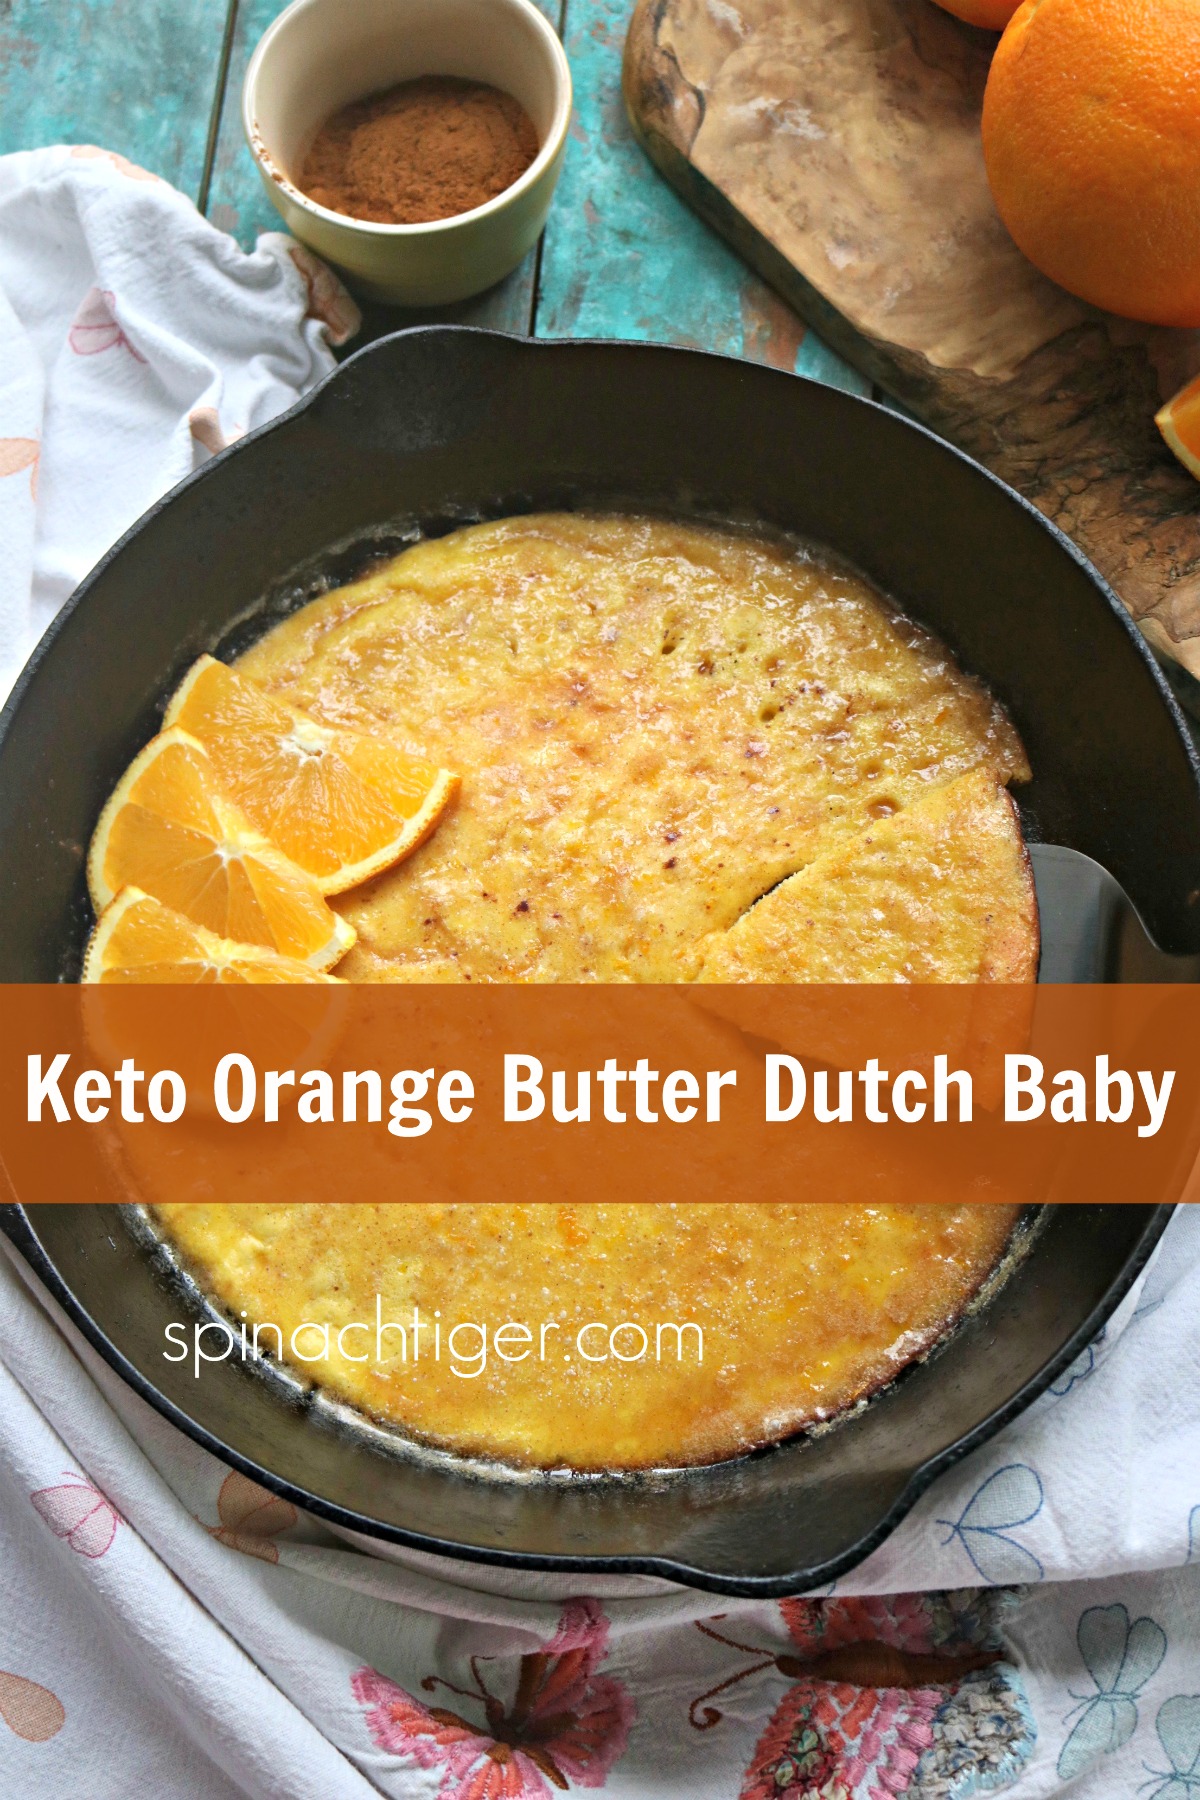 Keto Orange Butter Dutch Baby from spinach tiger